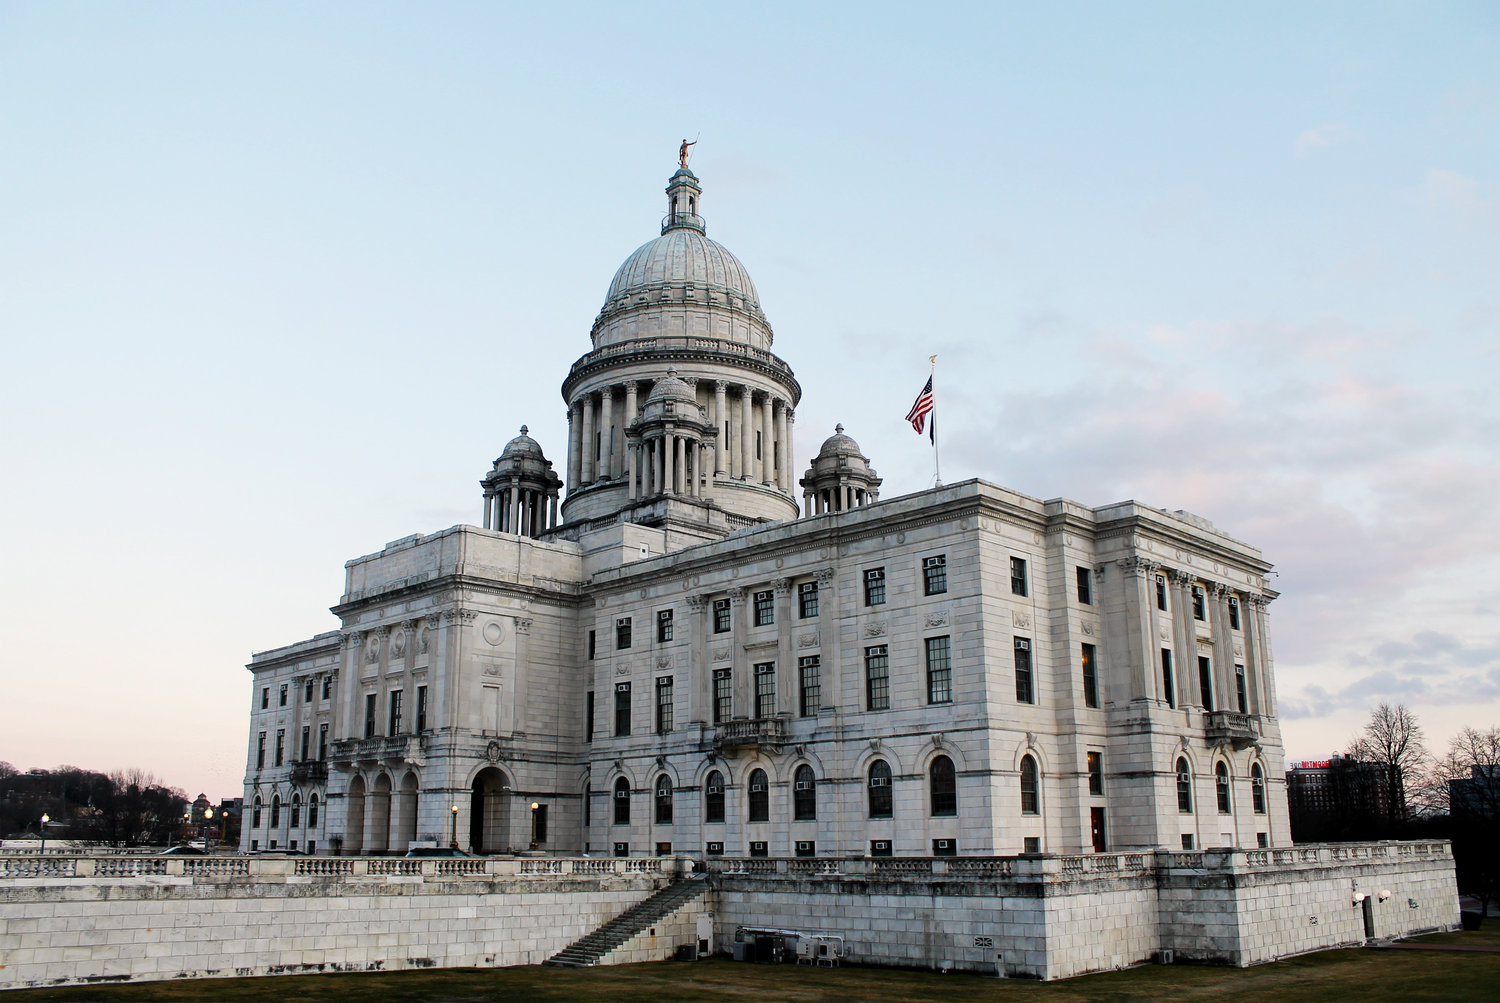 Rhode Island’s iconic State House